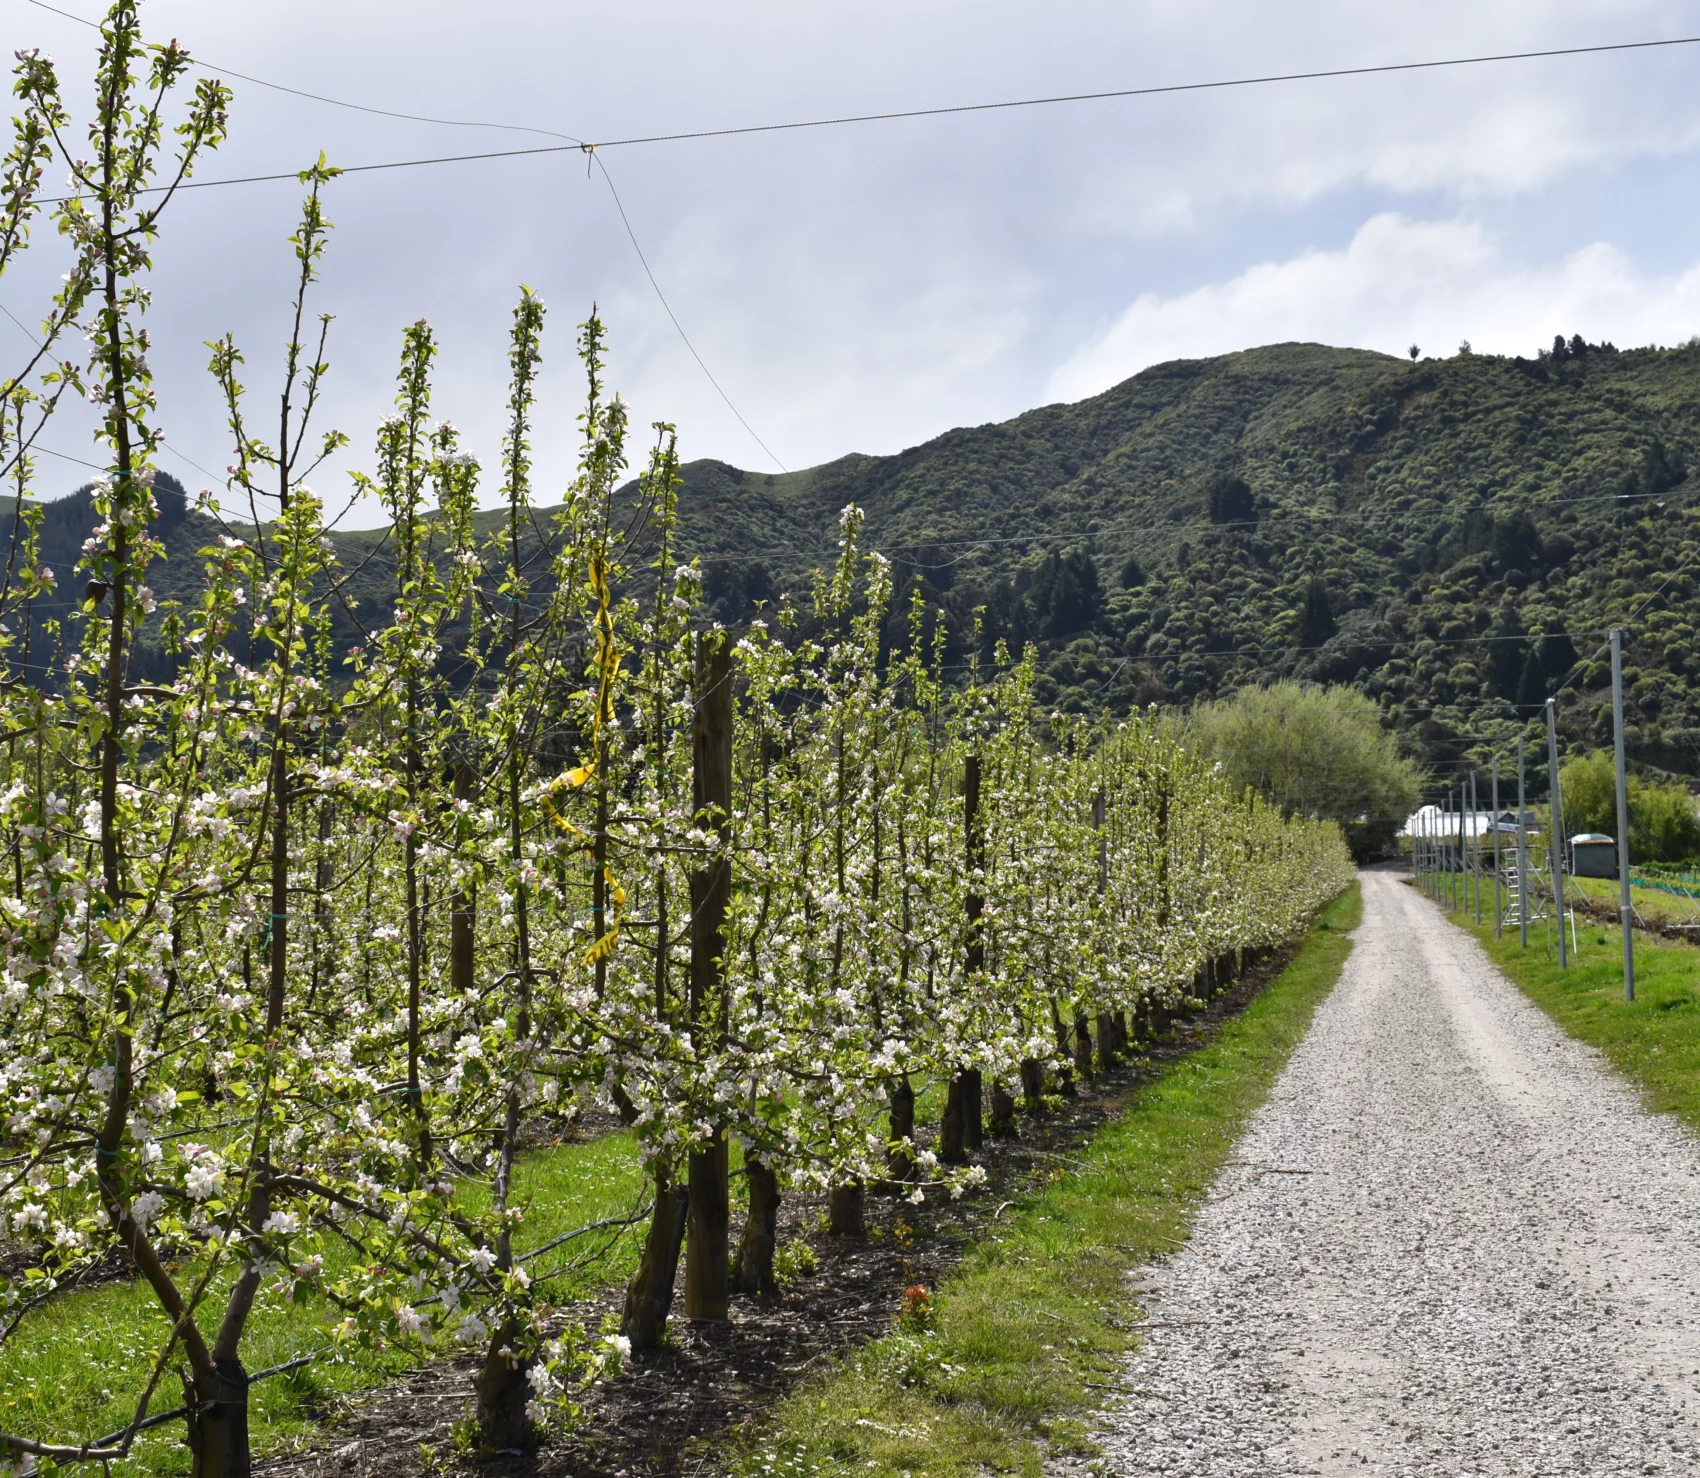 Dirt road next to fruit trees at Heywood Orchards in Motueka New Zealand